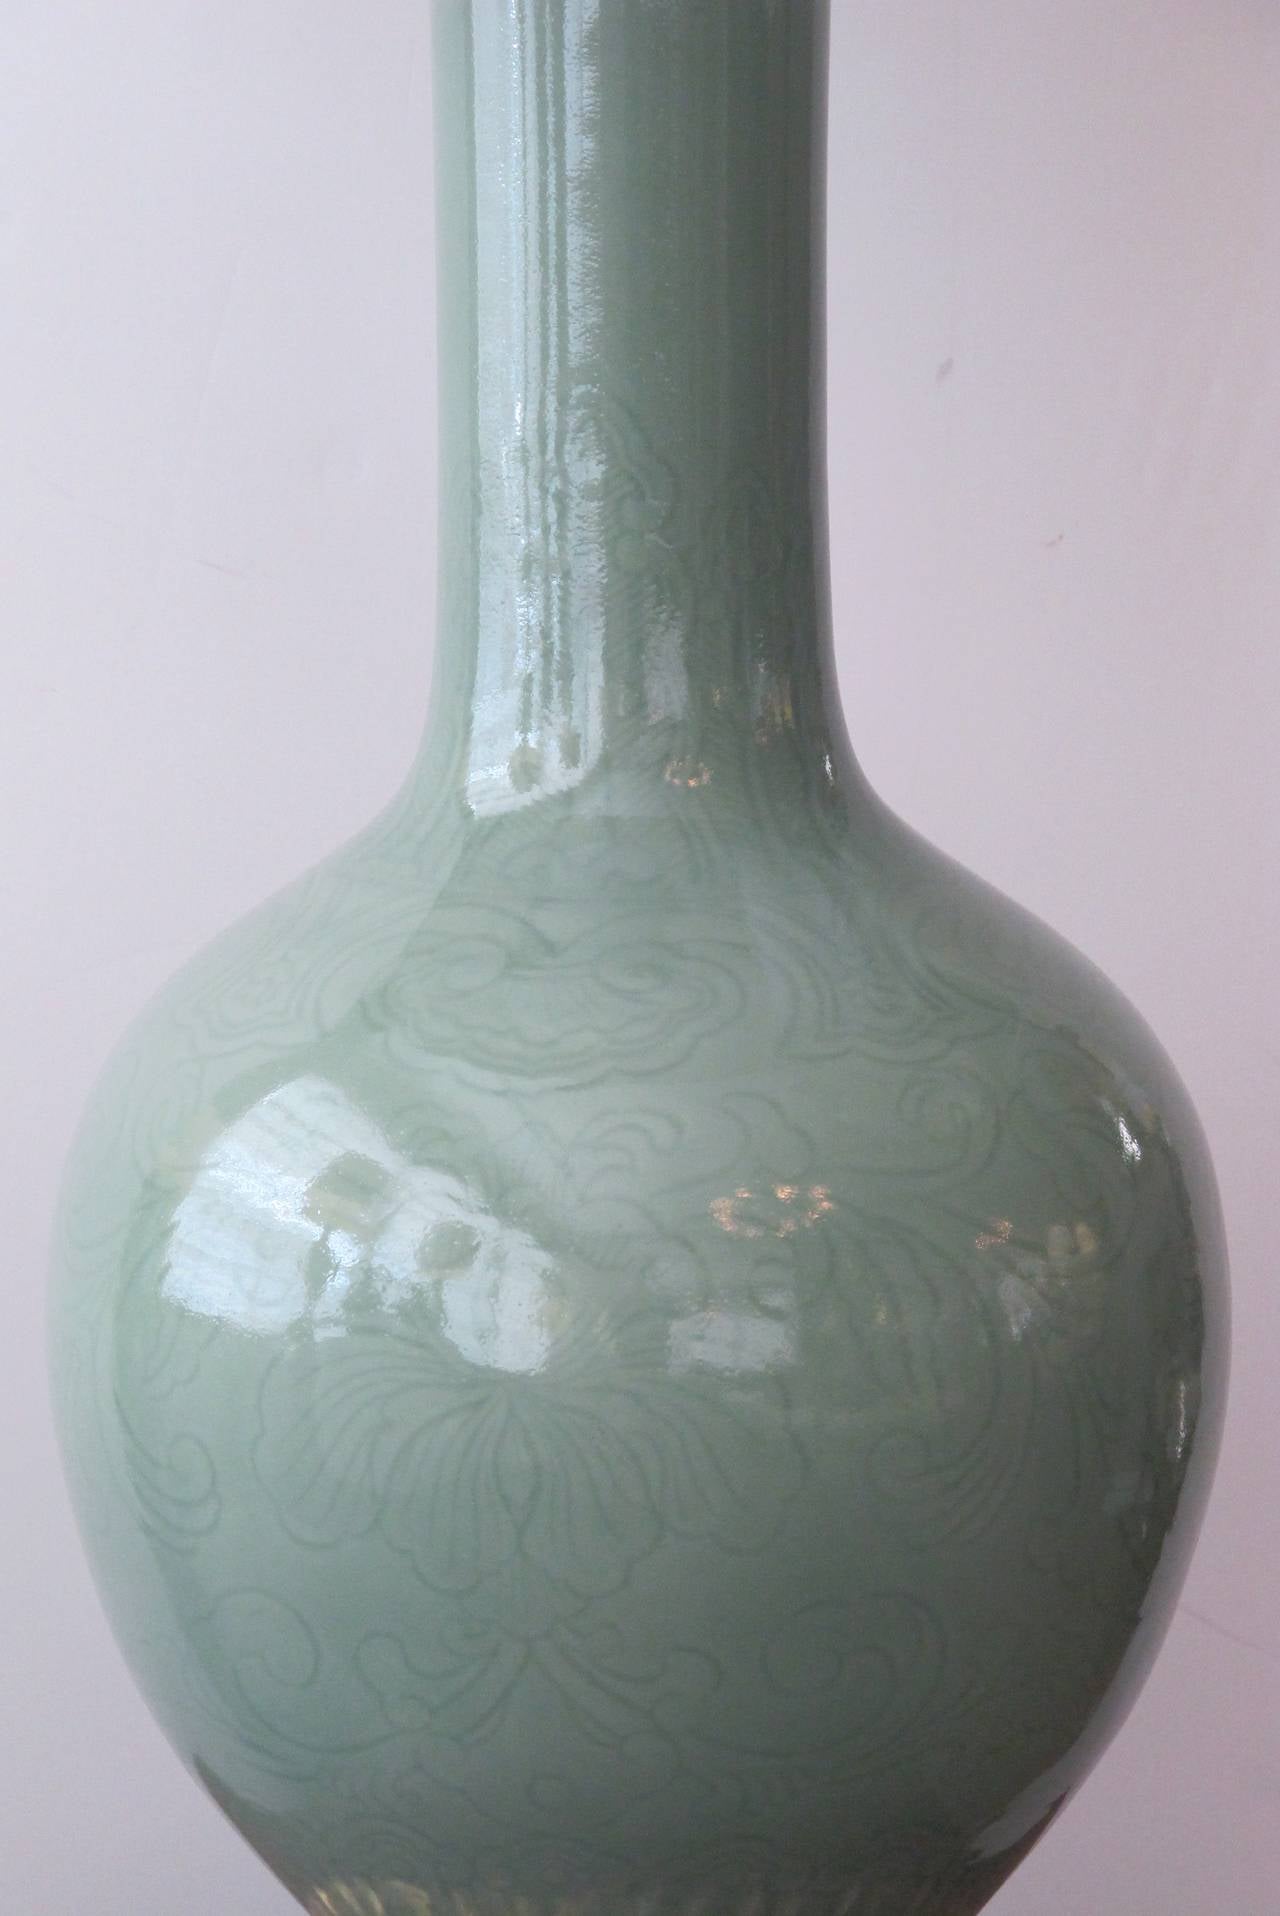 A large-scaled and good pair of Chinese bottle-form celadon lamps on gilt wood bases; each with long neck adorned with incised lappet decoration above a portly body with floral and foliate carving